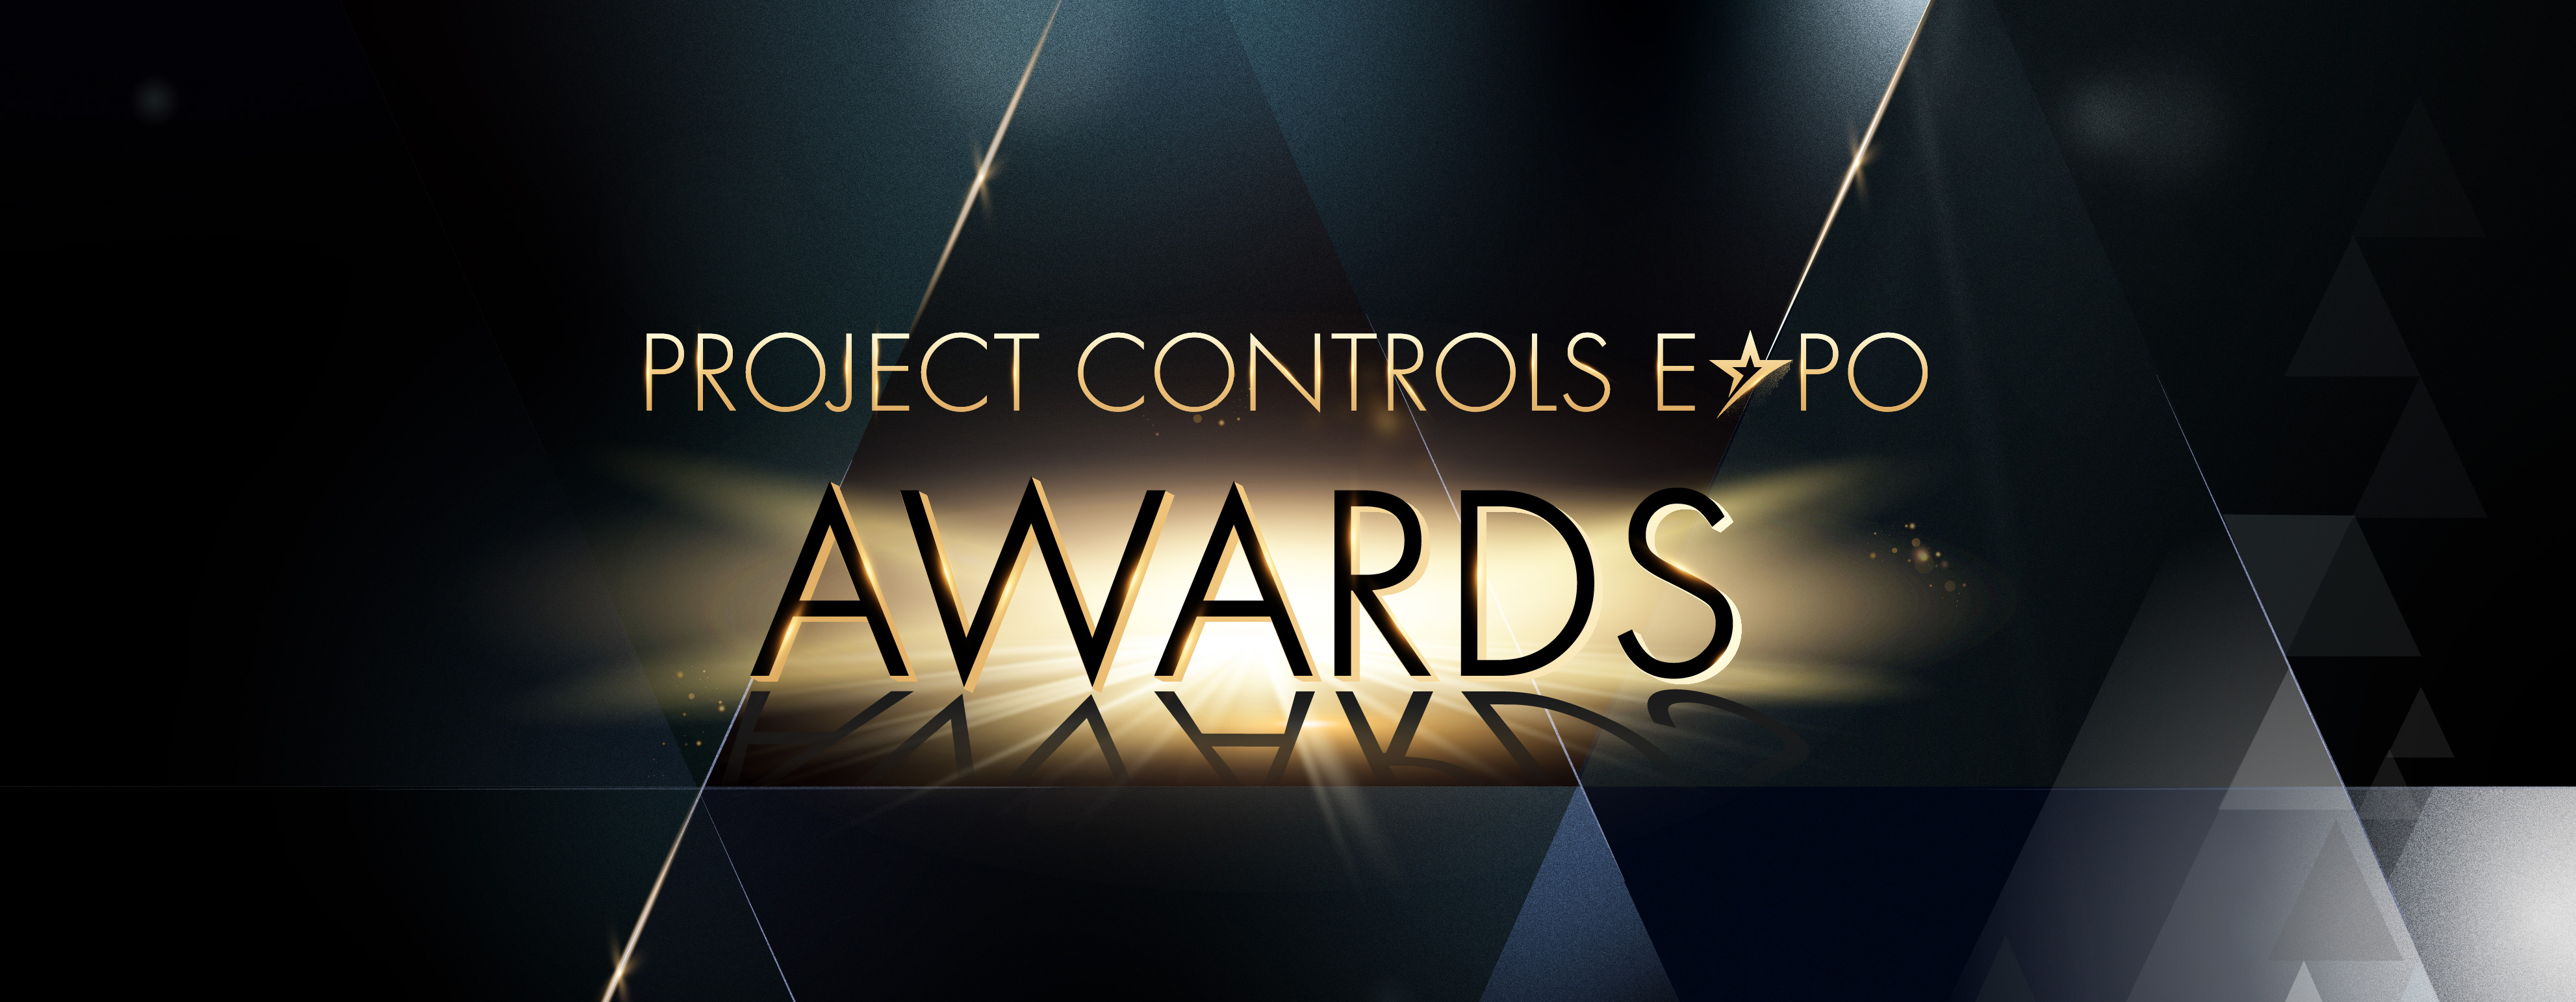 Awards Gallery Project Controls Expo